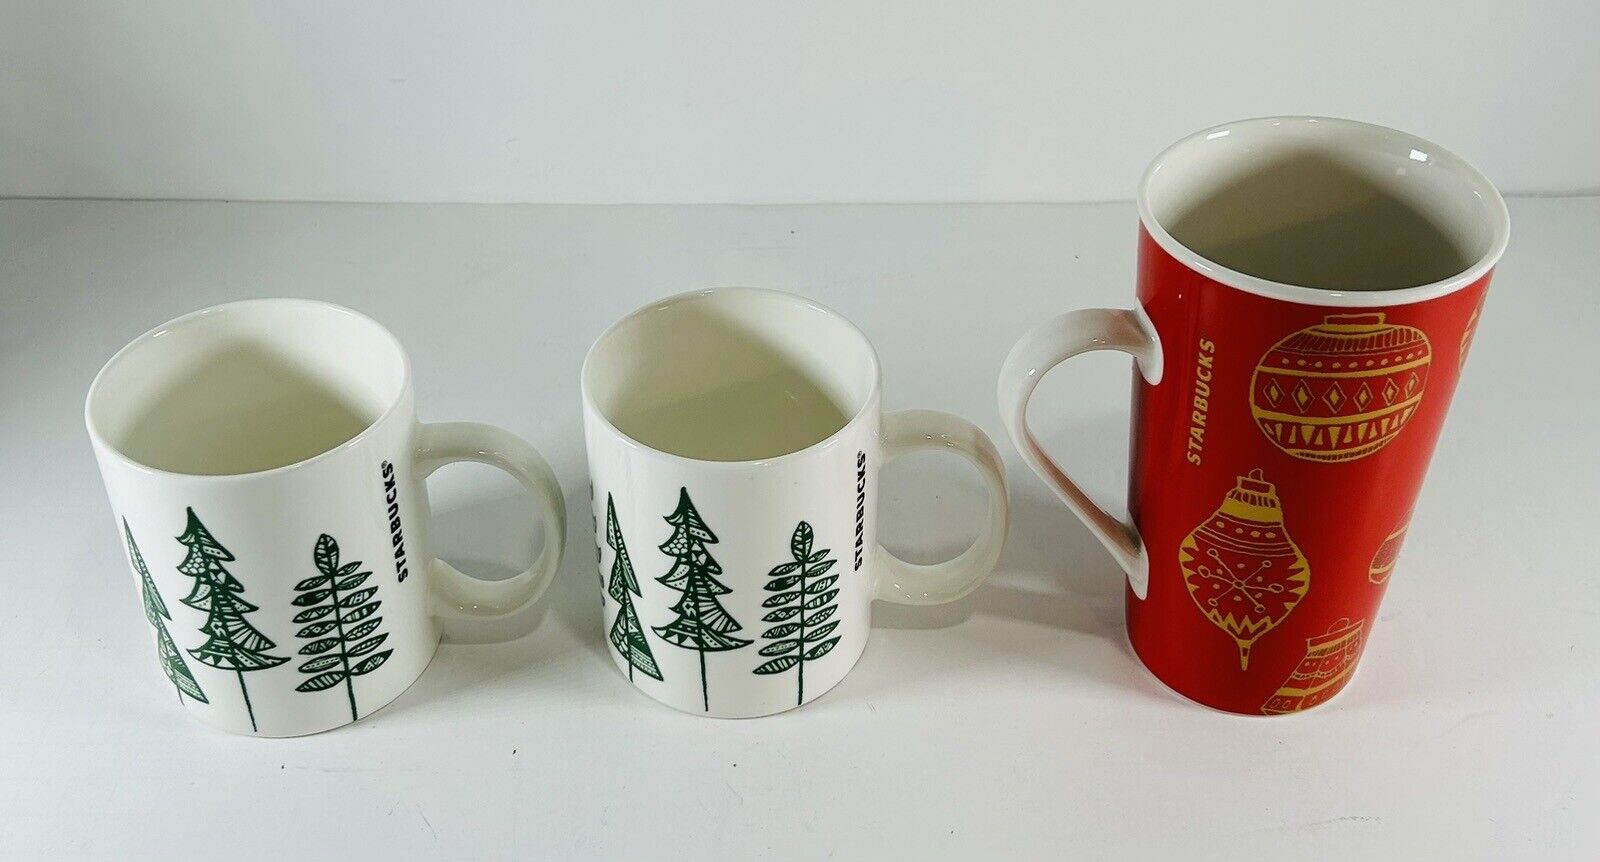 Lot Of 3 Starbucks Coffee Mugs With Trees And Ornament Design